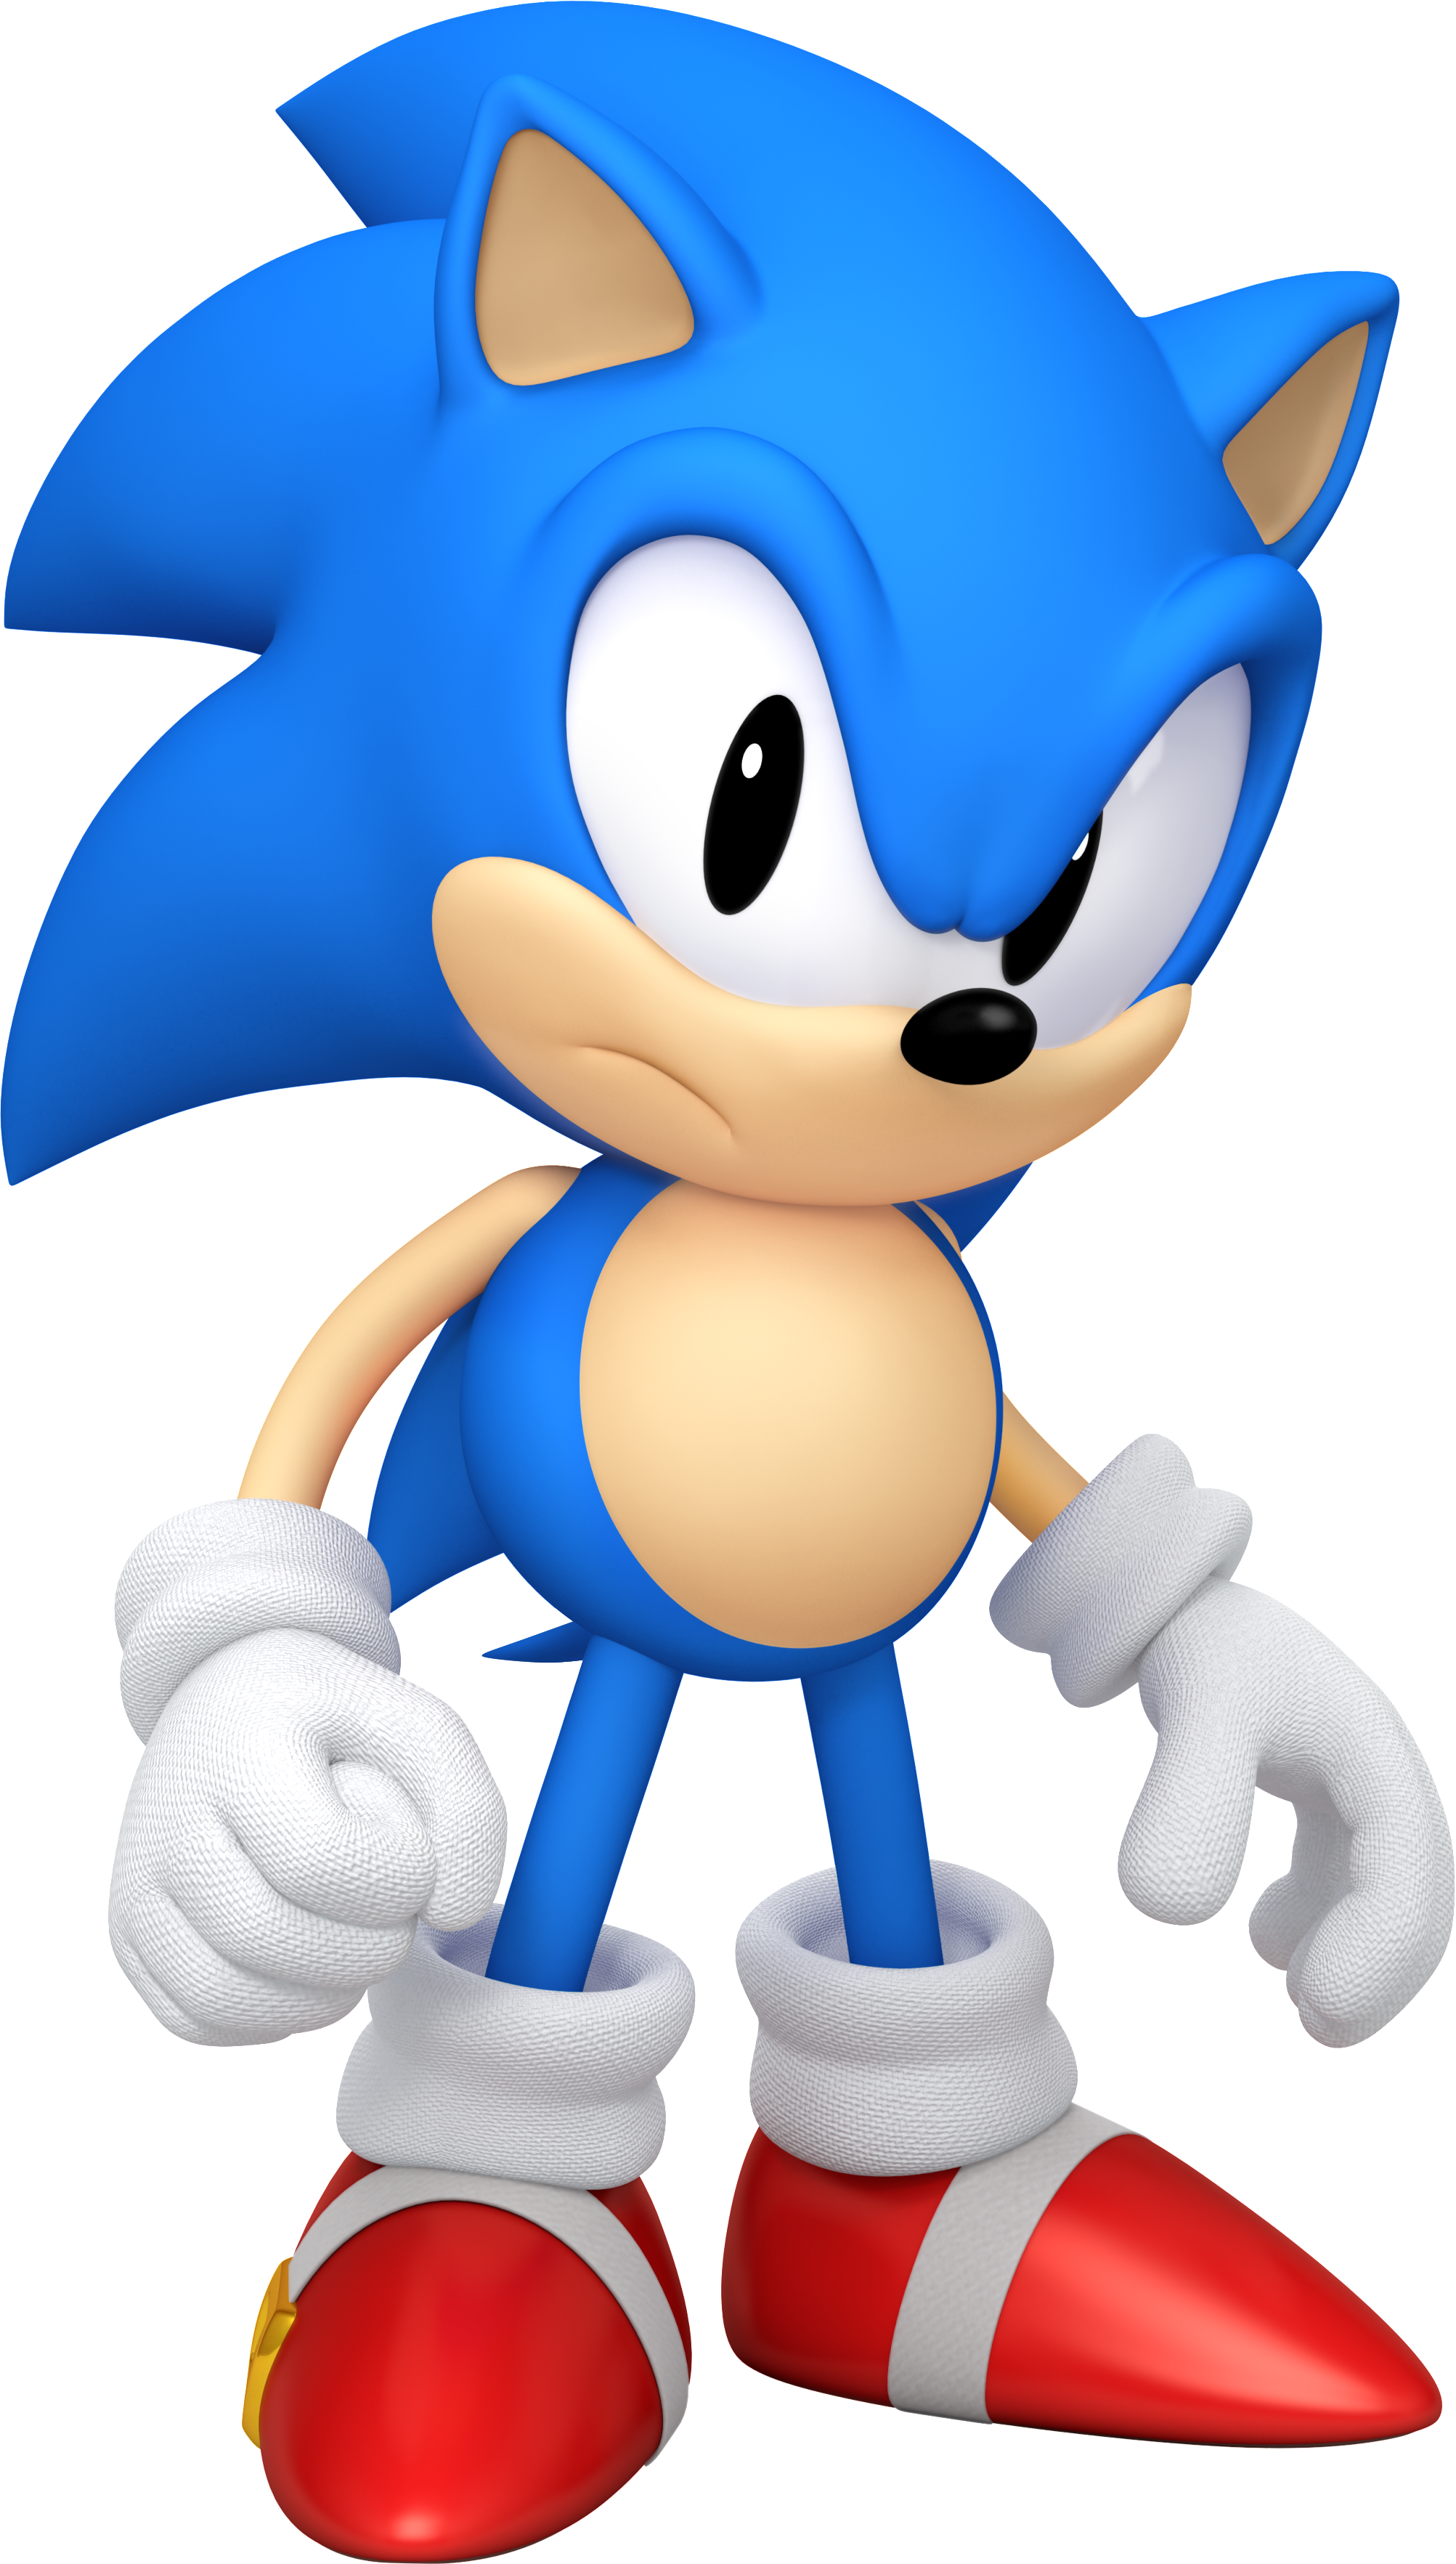 Sonic the hedgehog canon game characterfnw gamer character stats and profiles wiki